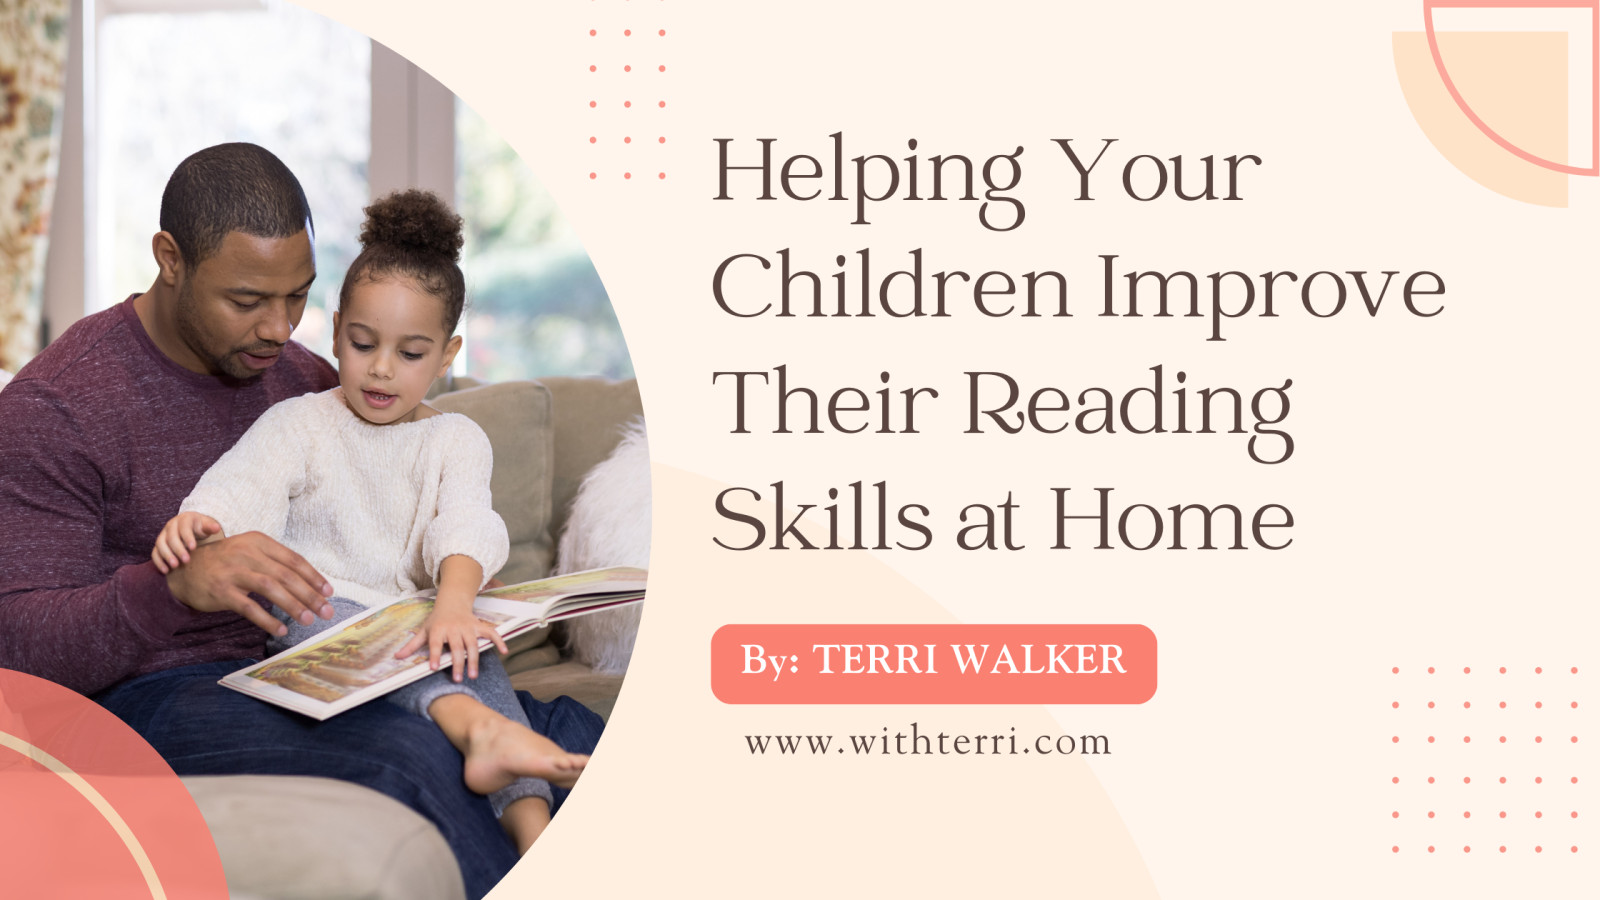 Helping Your Children Improve Their Reading Skills at Home